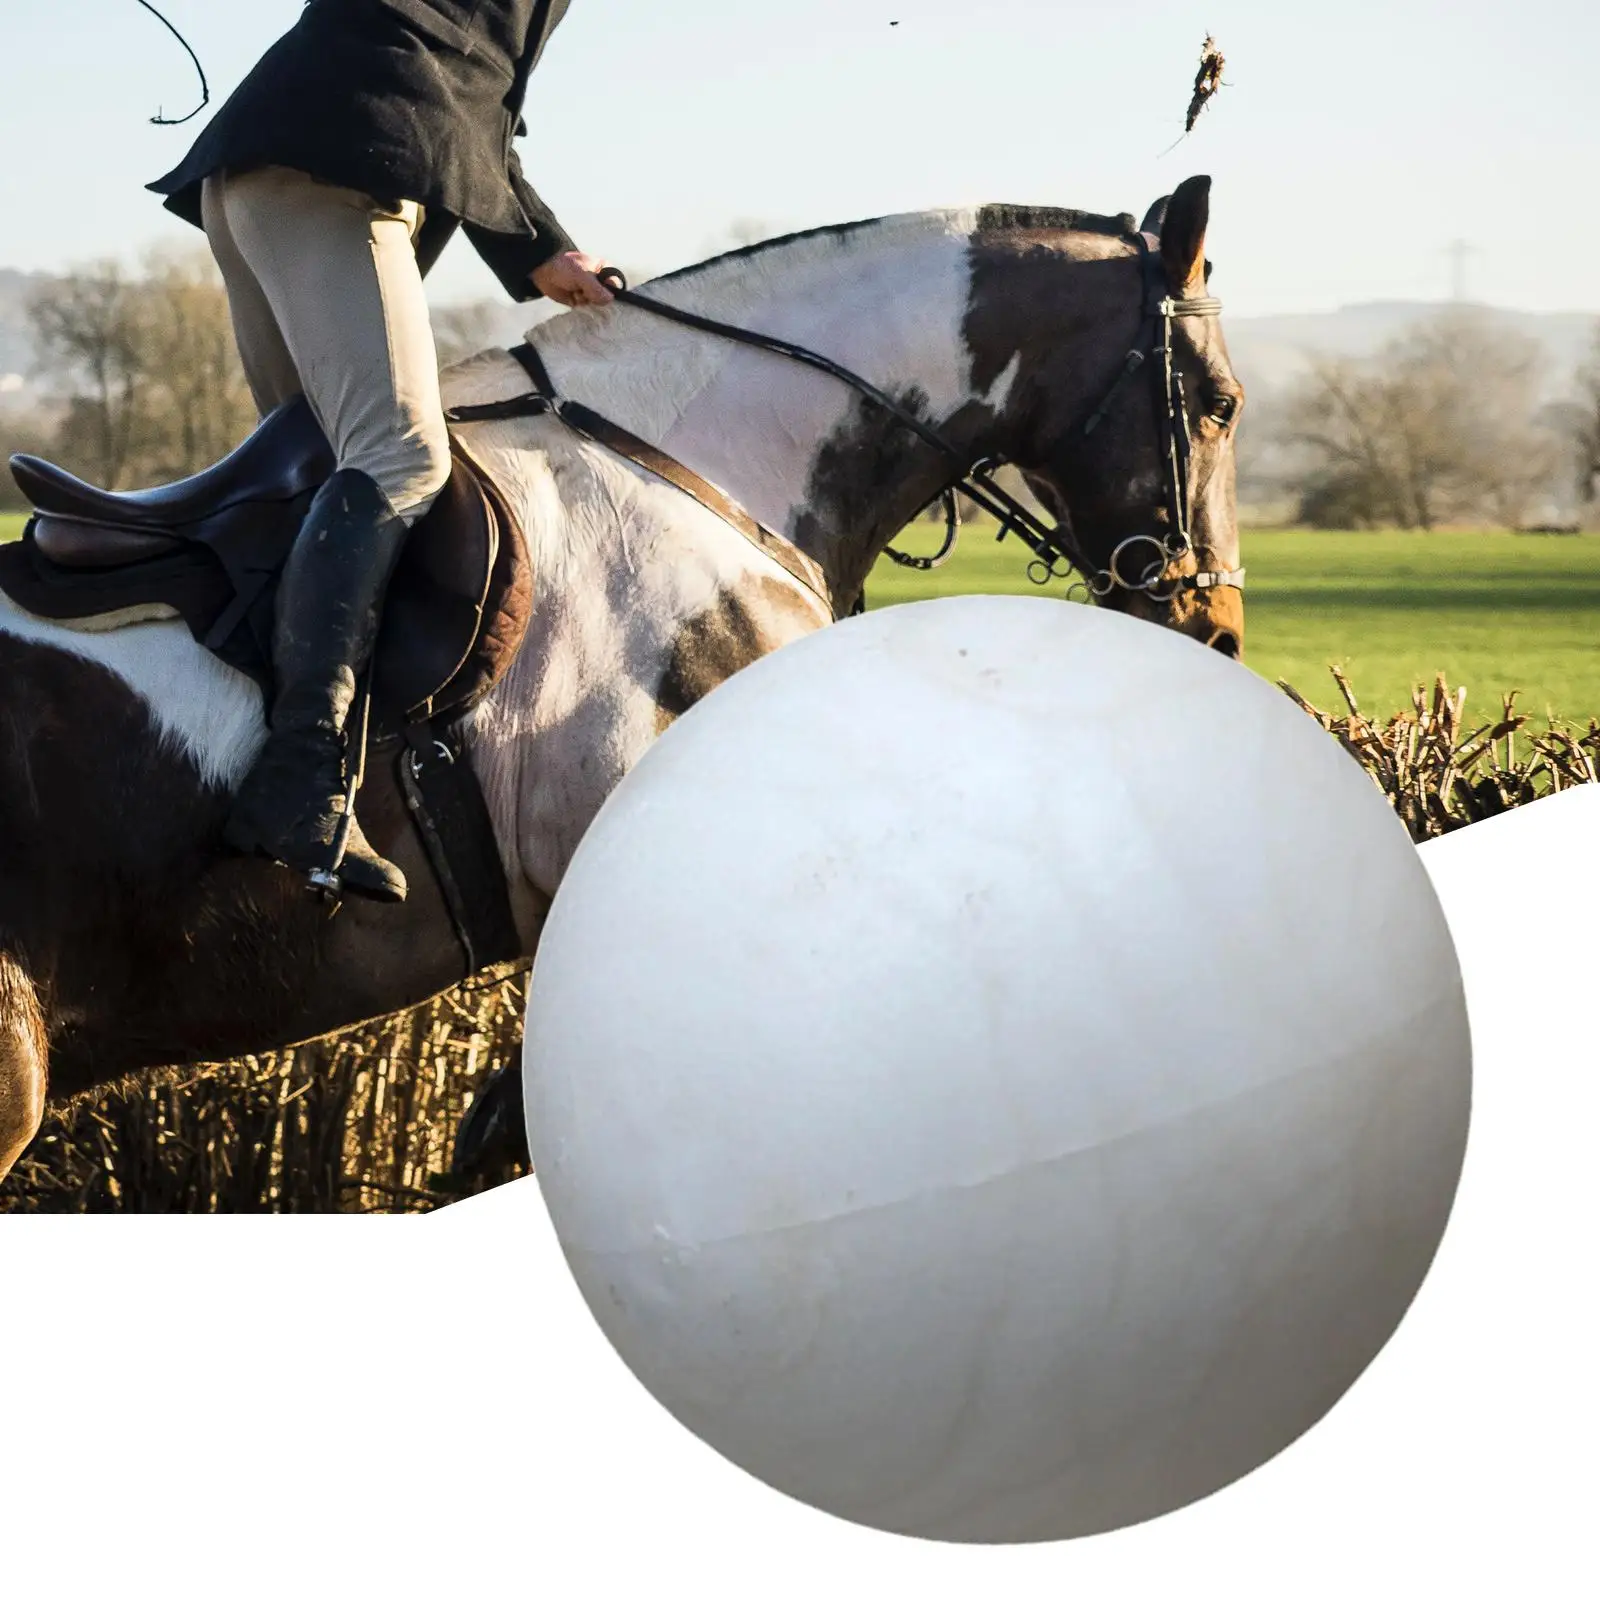 Toss Jolly Play Ball Durable PC Portable Lightweight Horse Play Ball for Game Playing Tugging Donkeys Sheep Tossing